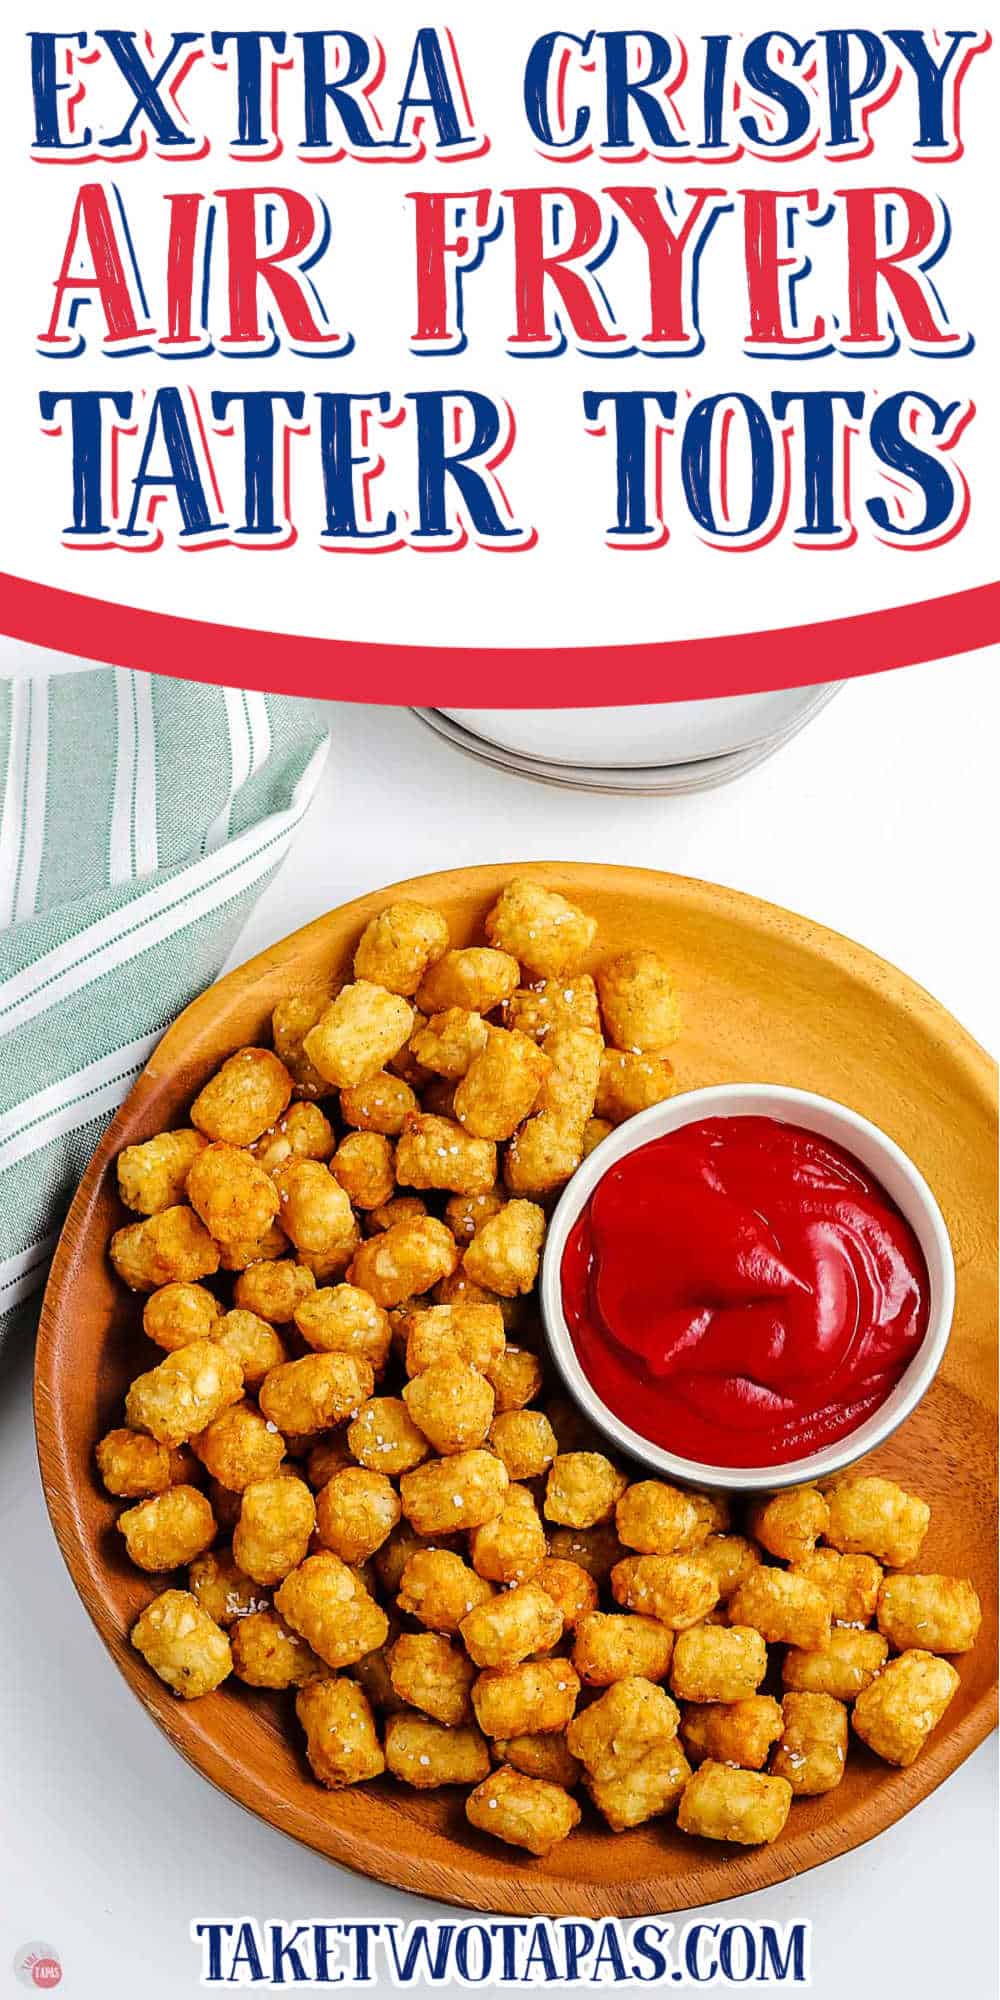 tater tots with text "air fryer just 3 ingredients"